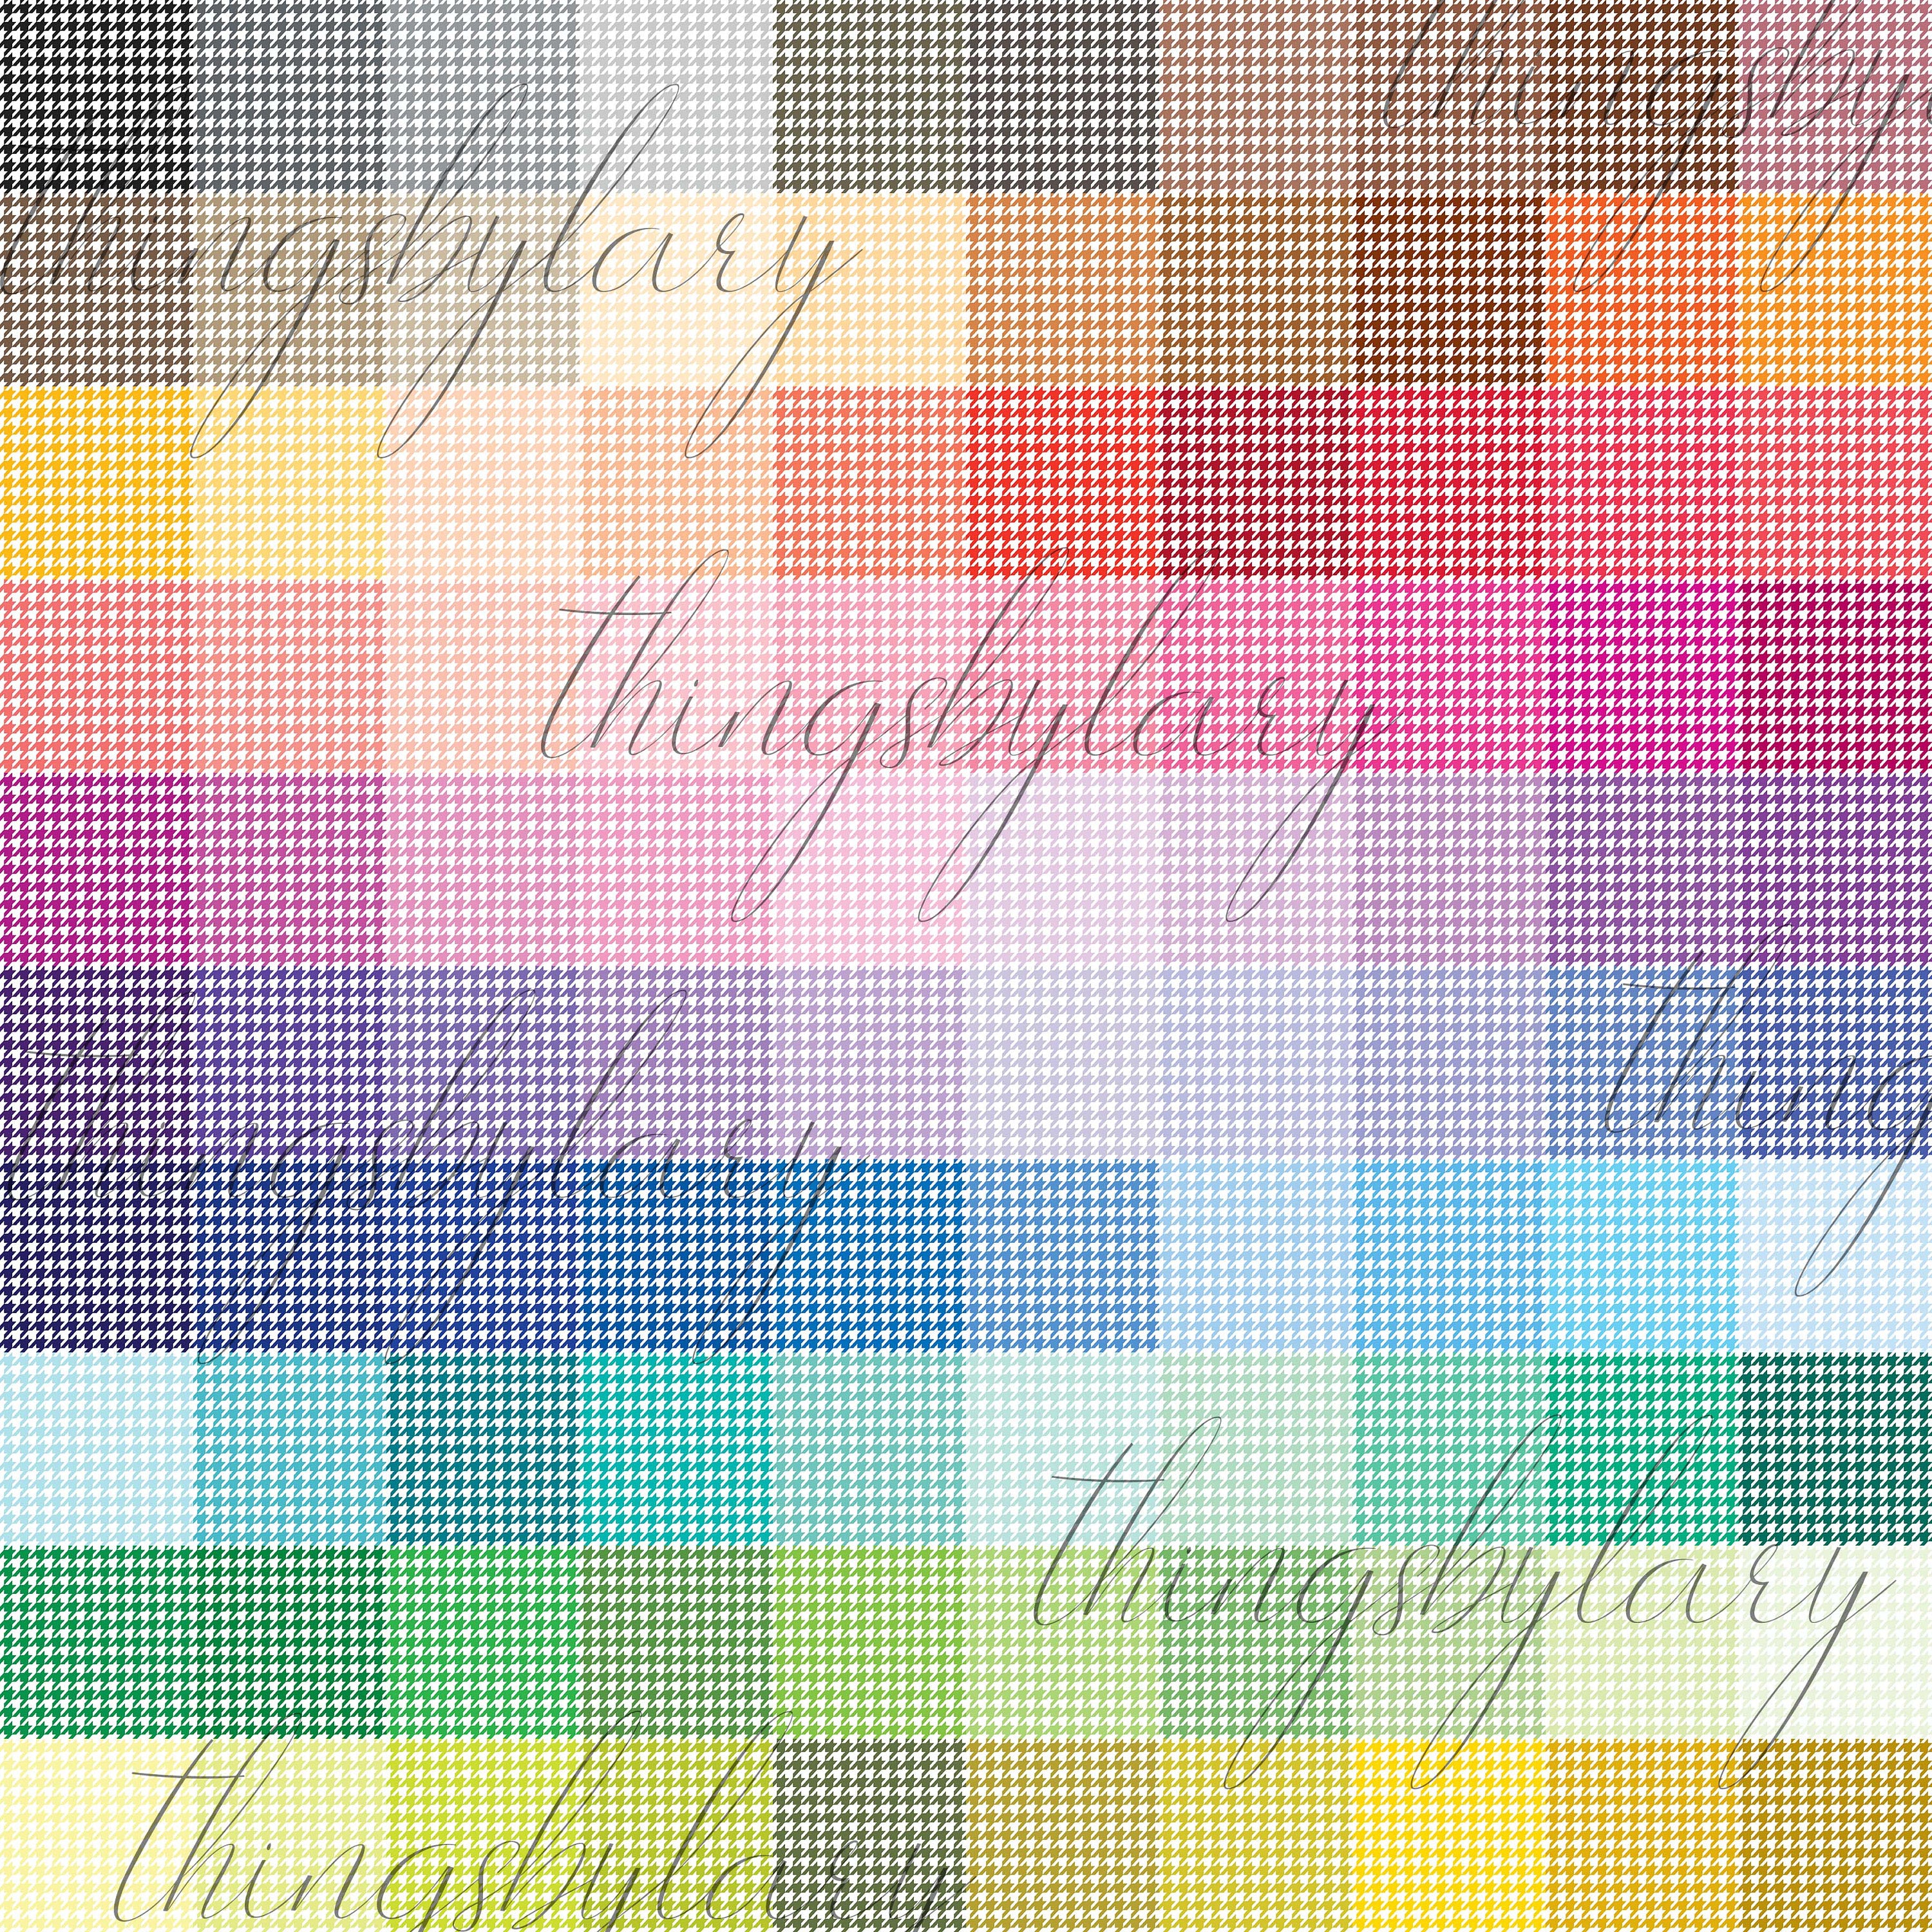 100 Seamless Color Houndstooth Digital Papers 12&quot; 300 Dpi Commercial Use Instant Download Printable Retro Pattern University Back to School